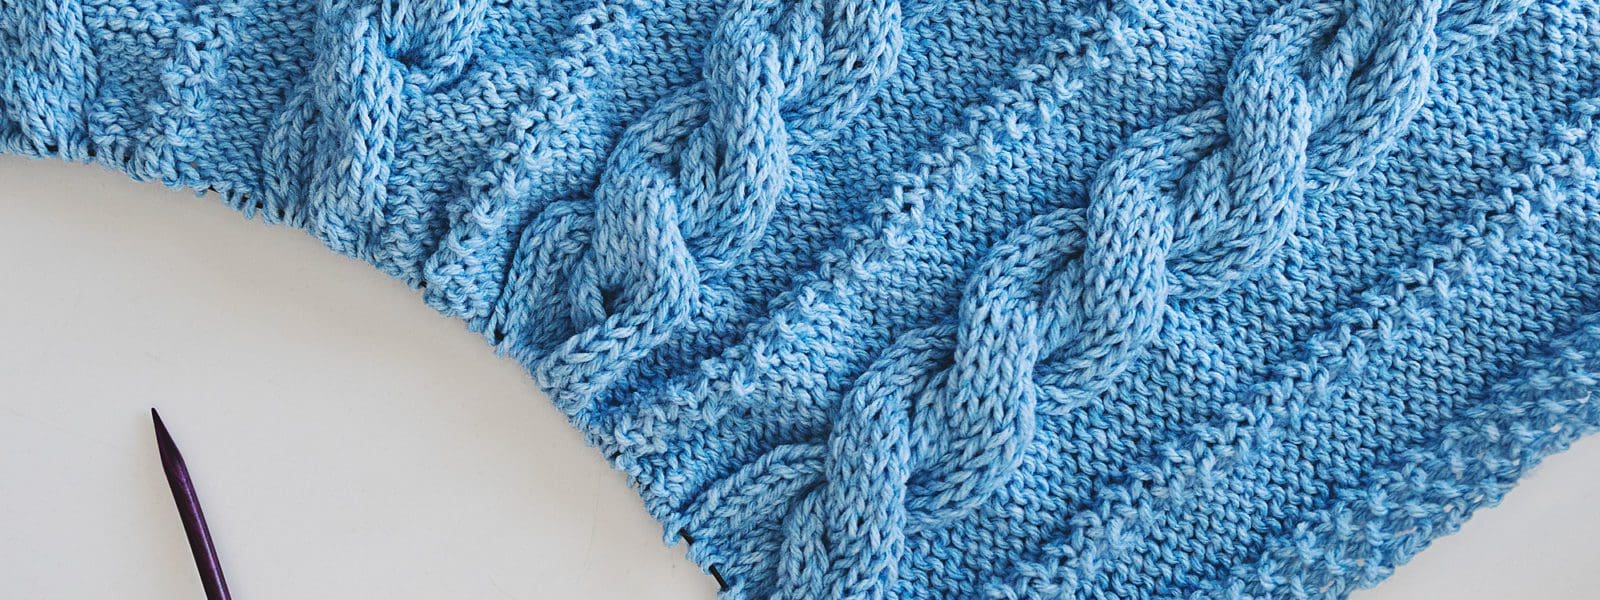 Cuddly Cable Knit Baby Blanket Pattern